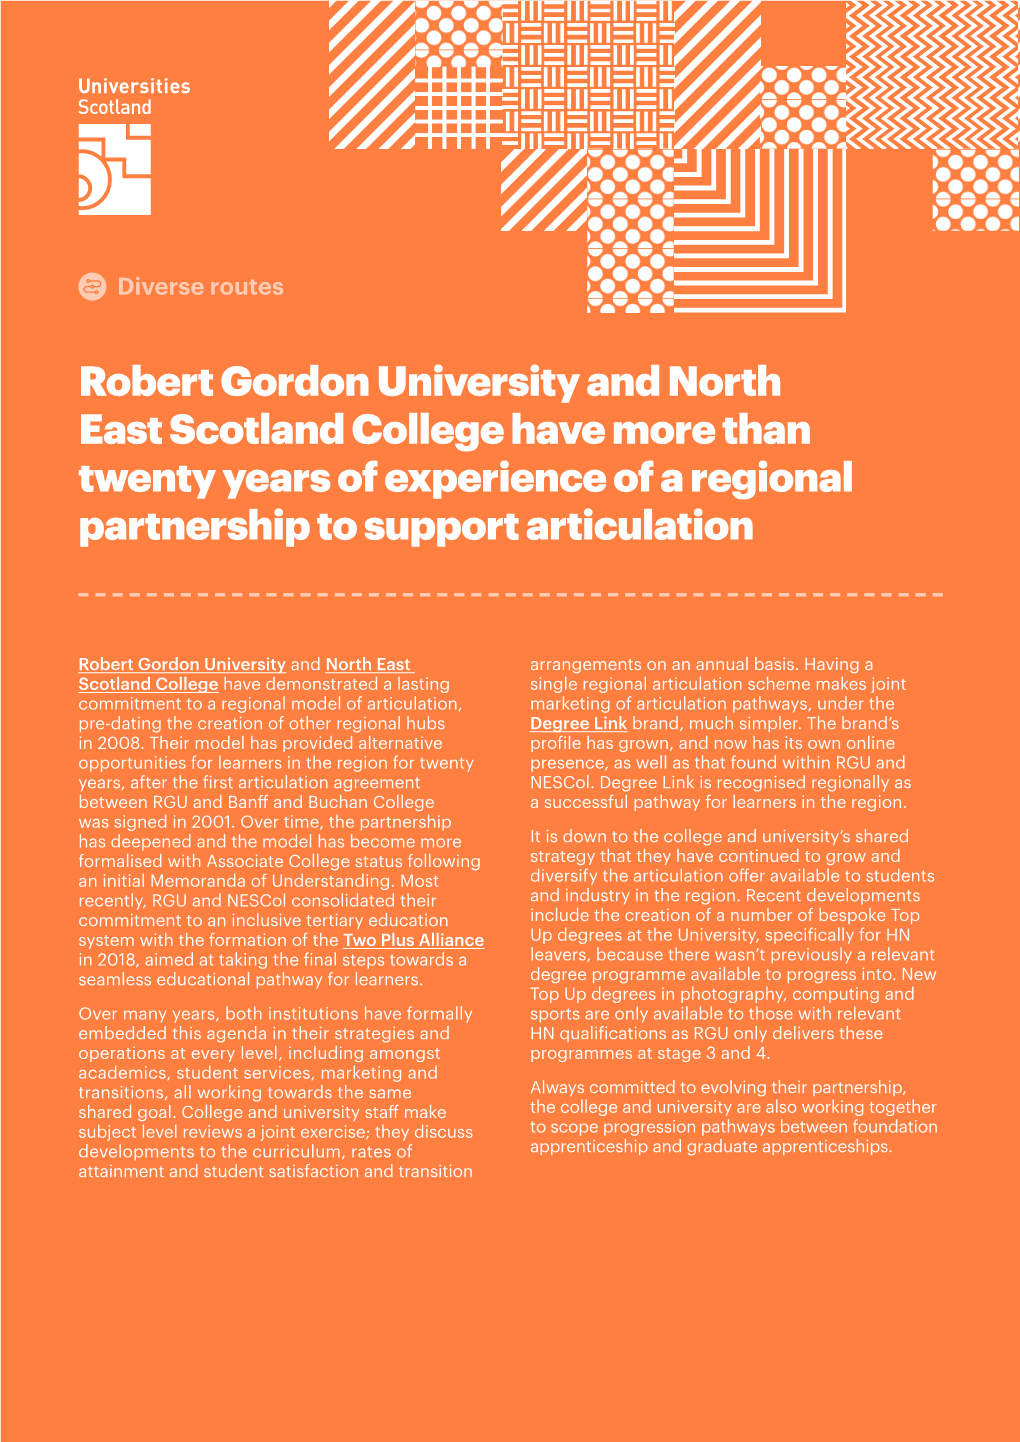 Robert Gordon University and North East Scotland College Have More Than Twenty Years of Experience of a Regional Partnership to Support Articulation